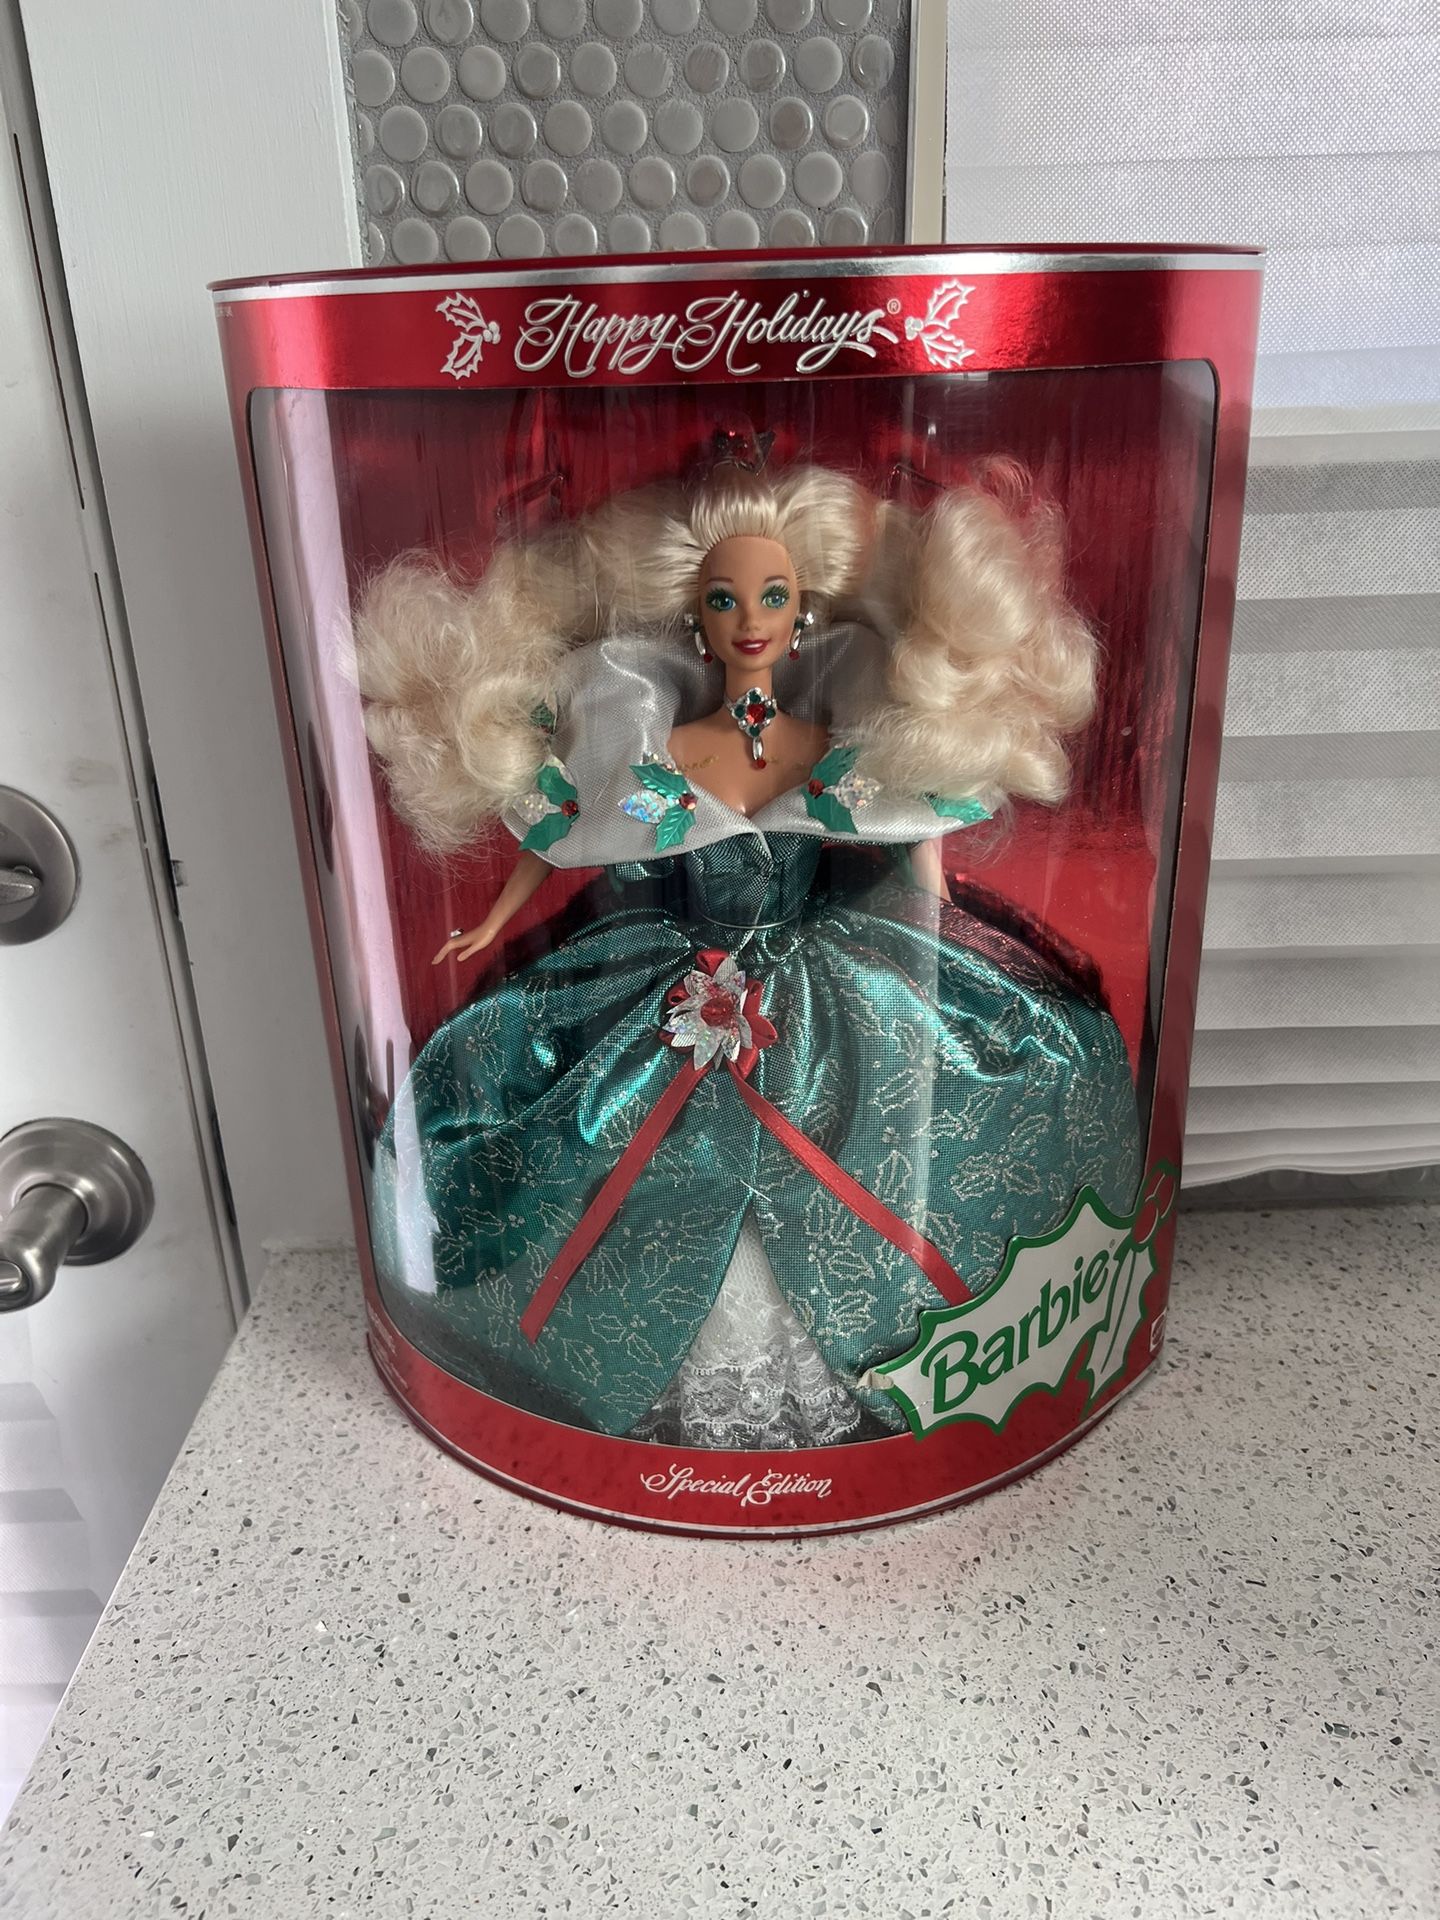 Vintage 1995 Happy Holidays Barbie Limited edition 1995 holiday Barbie    Mattel Happy Holidays 1995 Barbie Special Edition Rare Collector's 